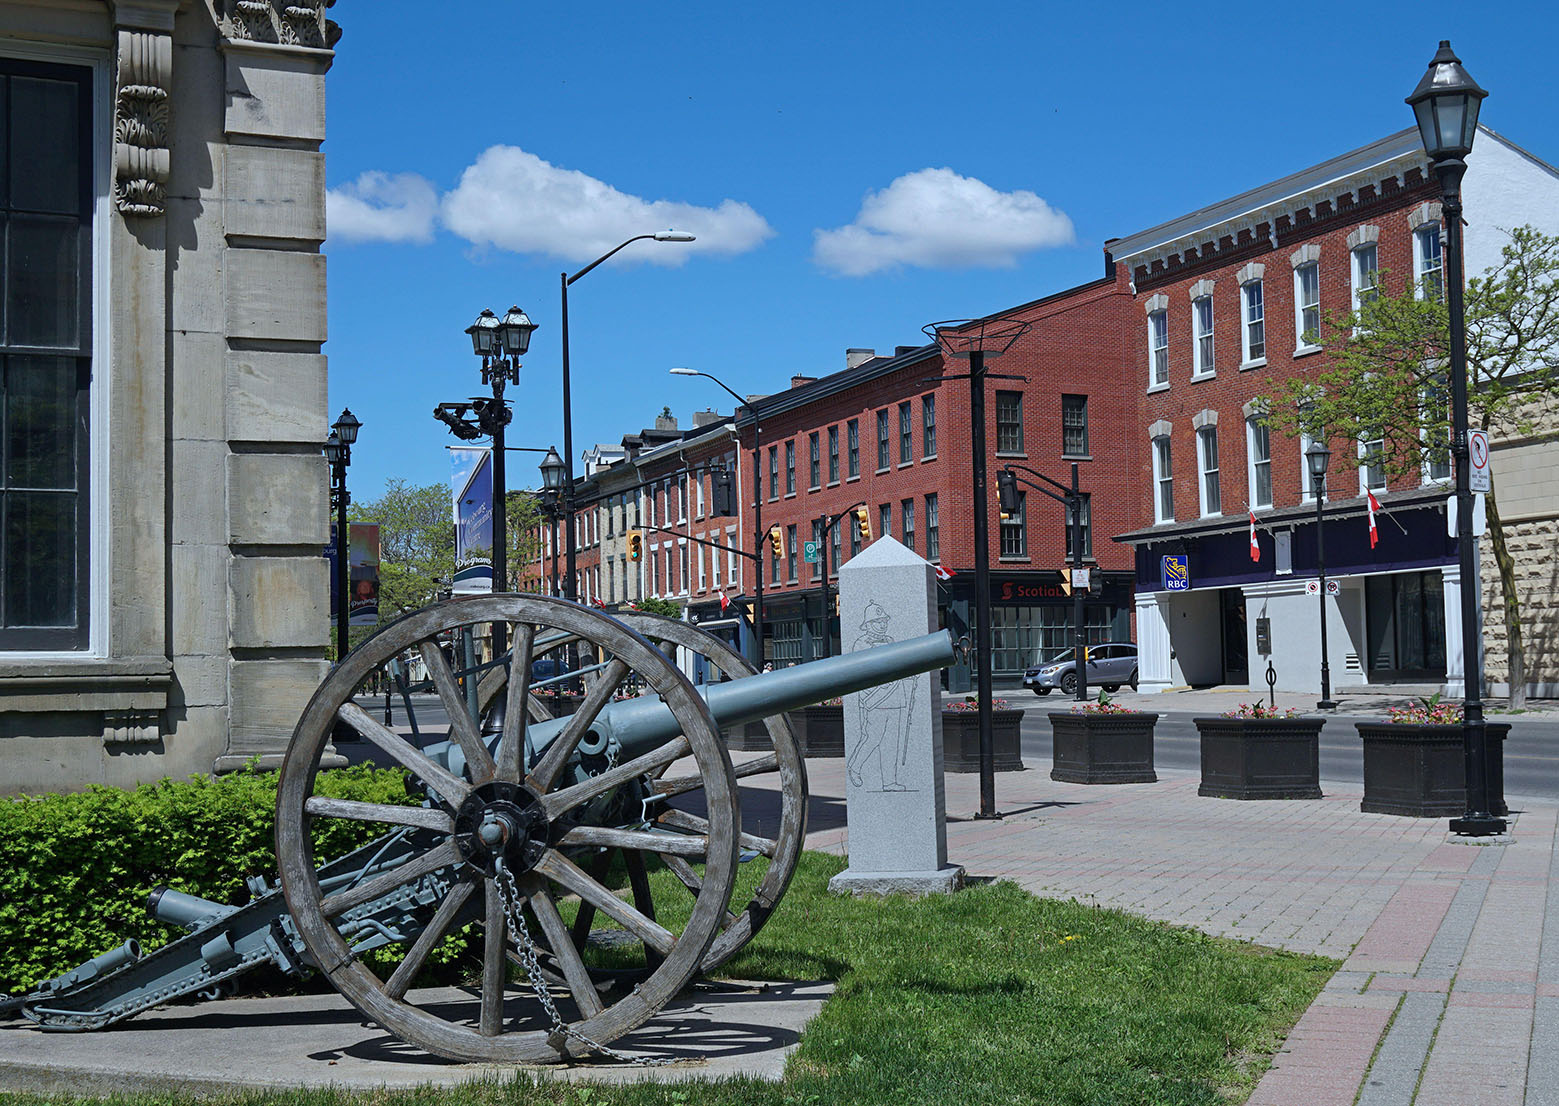 2BXK1FH Cobourg, Ontario, Canada - June 7, 2020:  This small town east of Toronto is proud of its historic heritage and preserves numerous buildings from the